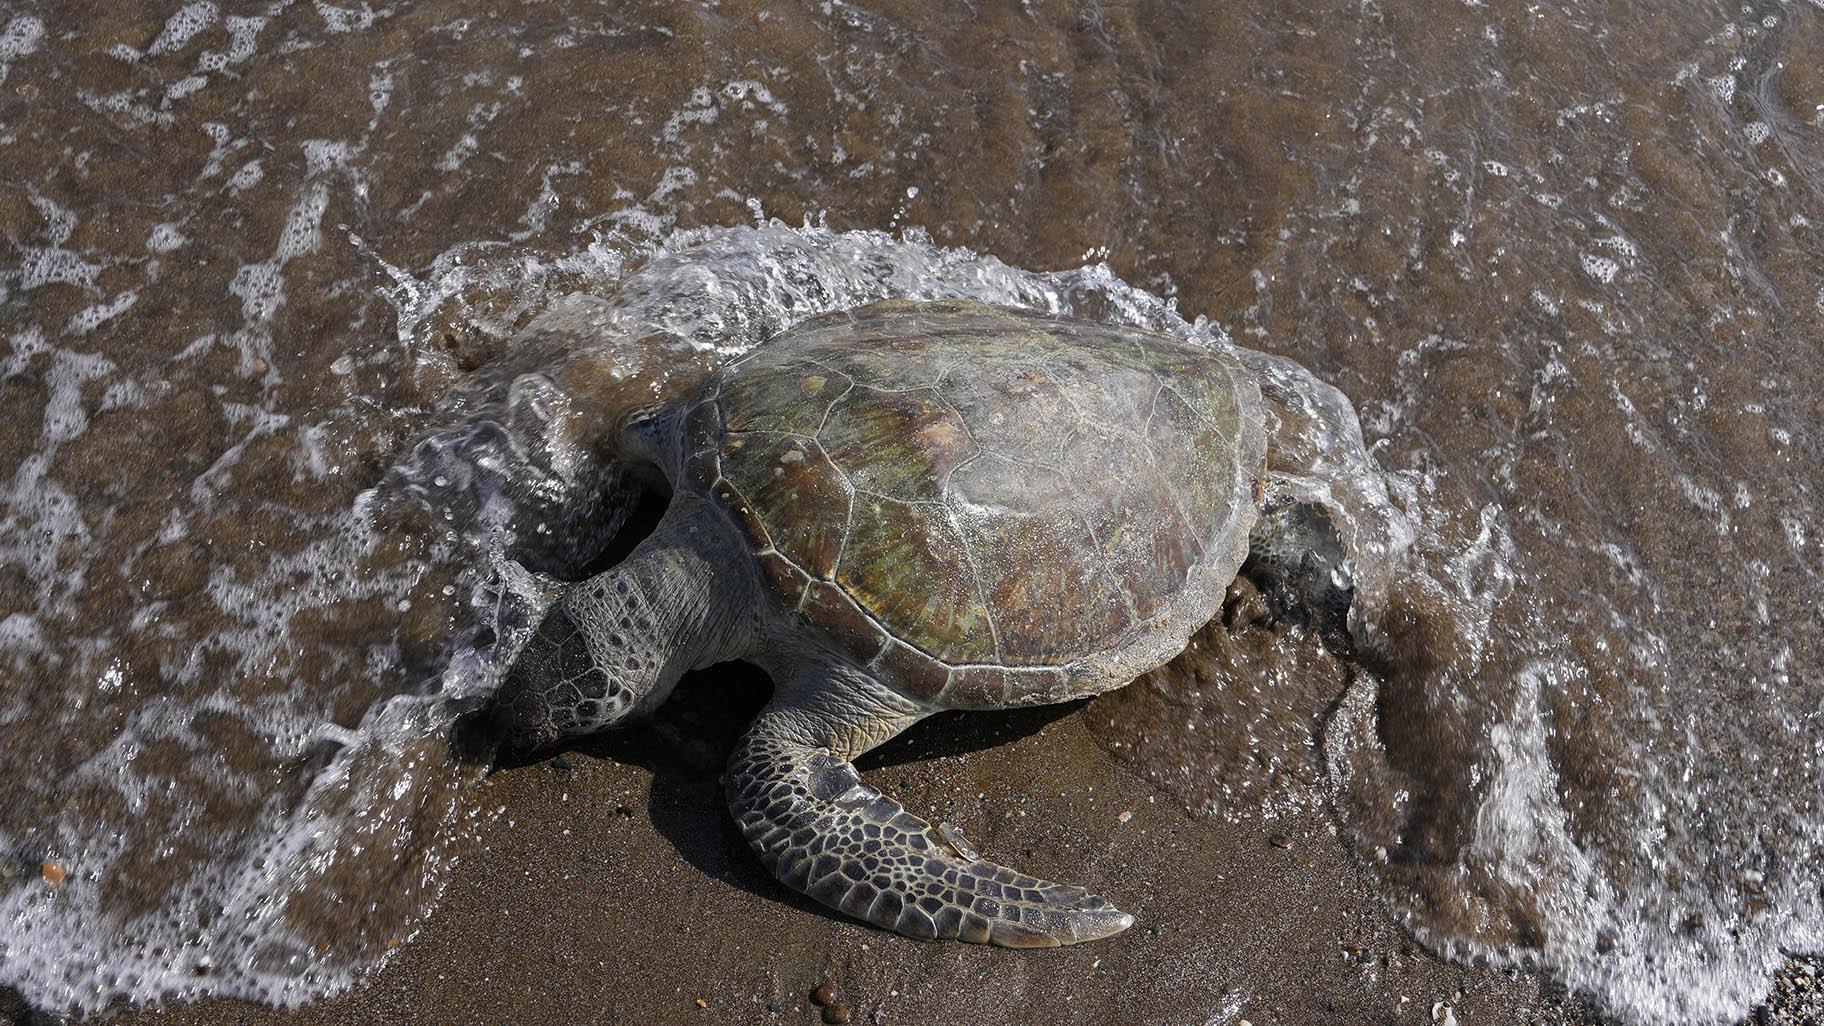 A dead green sea turtle washes up on the beach in the Khor Kalba Conservation Reserve, in the city of Kalba, on the east coast of the United Arab Emirates, Tuesday, Feb. 1, 2022. (AP Photo / Kamran Jebreili, File)